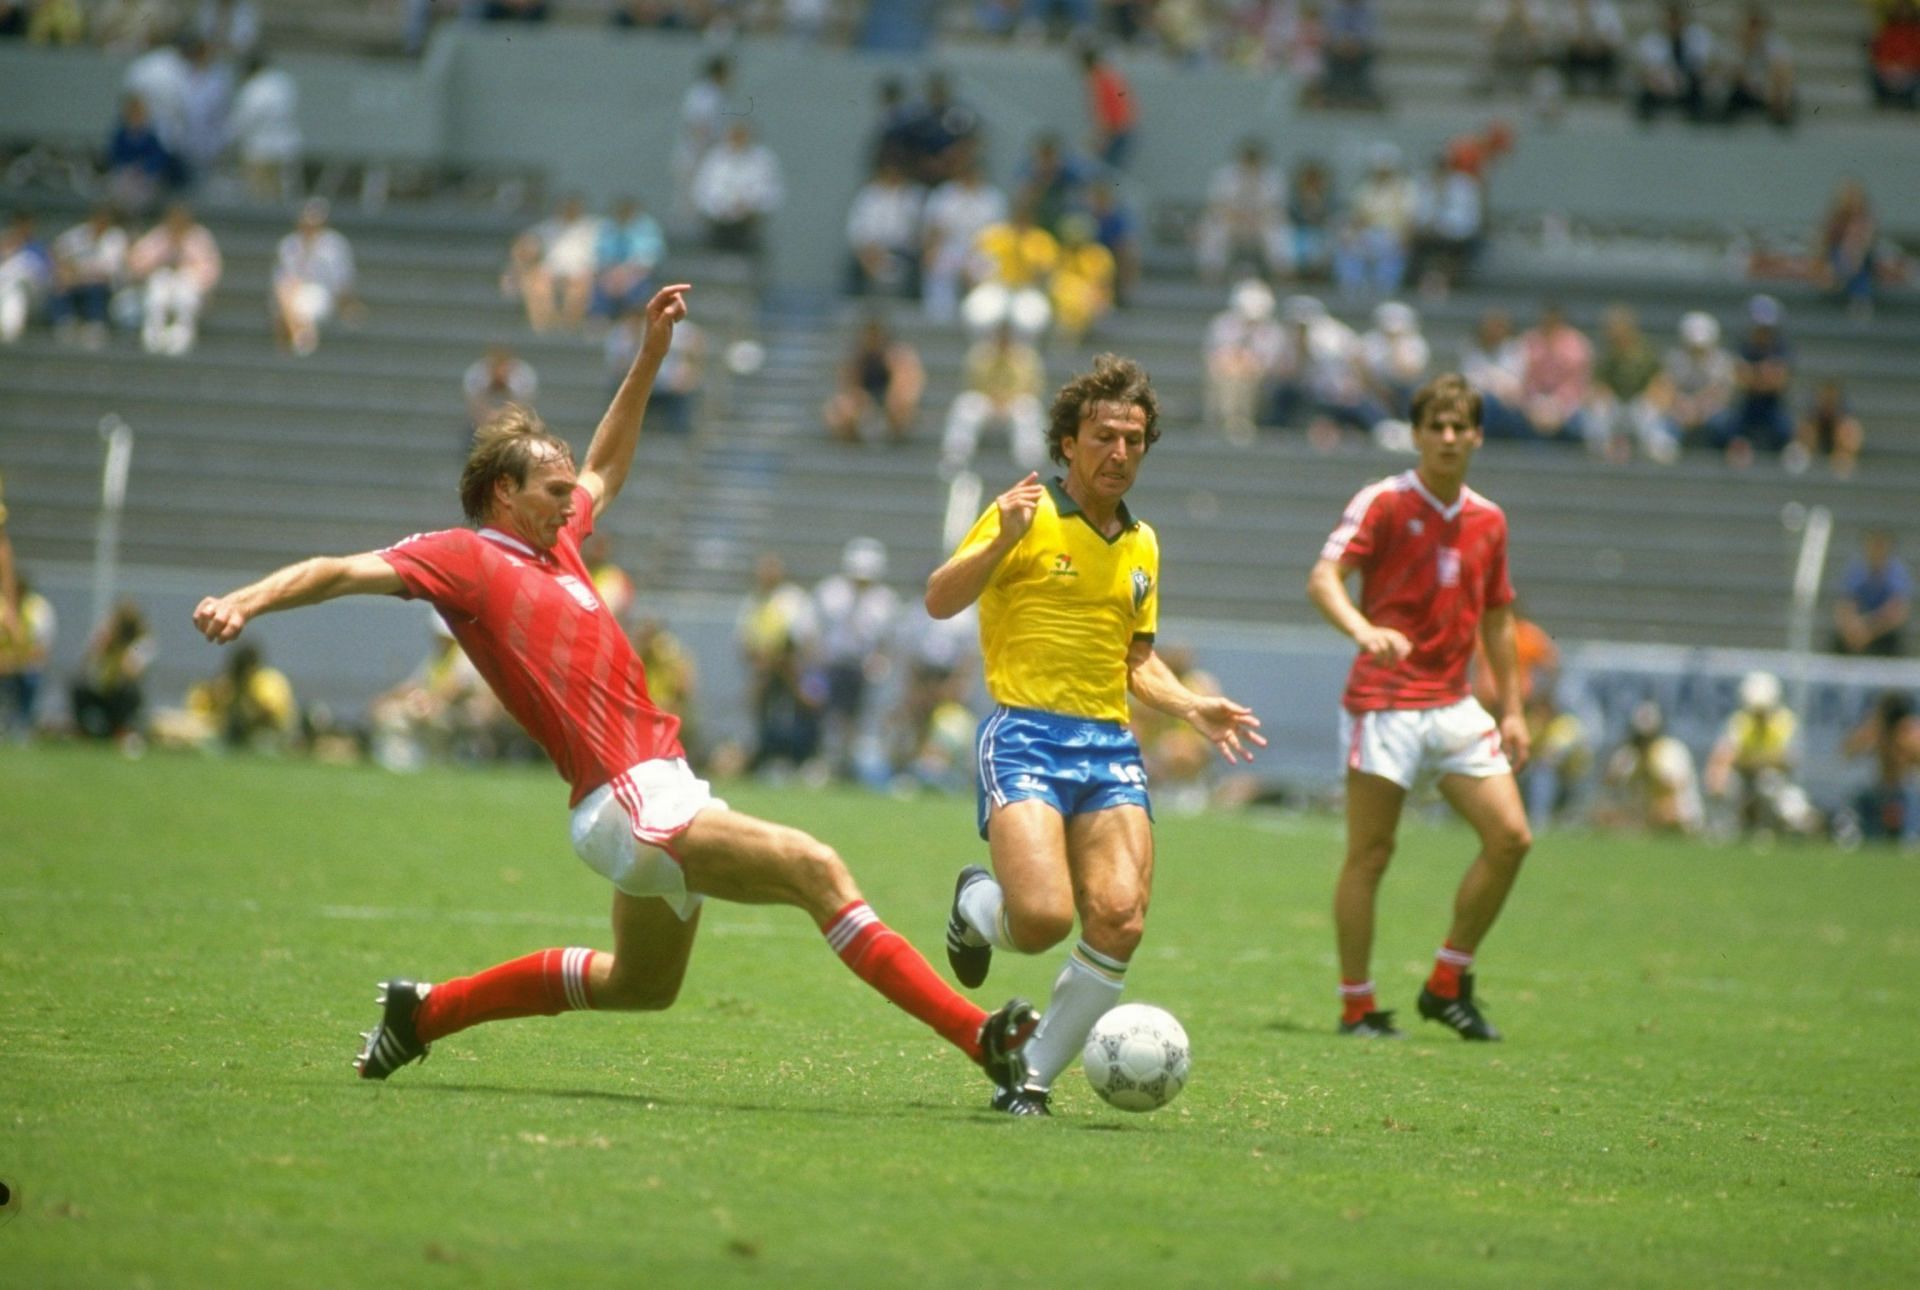 Zico is said to be holding the record for most number of set-piece goals (101) in the history of football